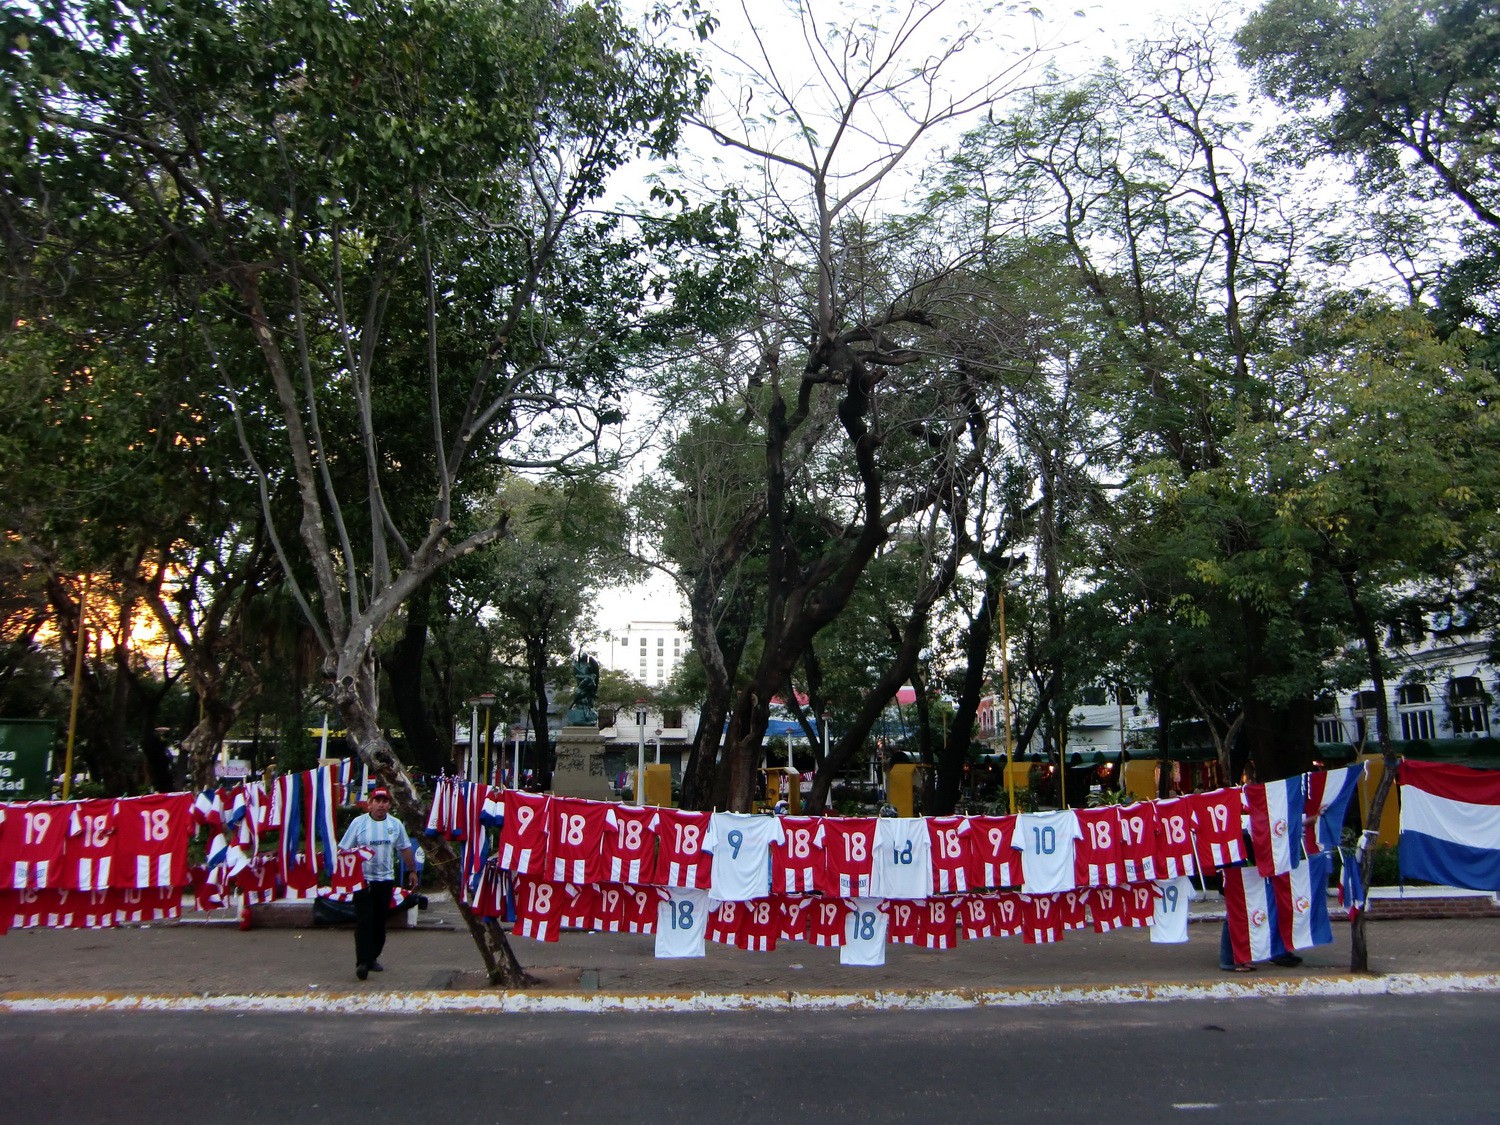 Football dresses of Paraguay - Tomorrow is the final game of the 2011 Copa America between Paraguay and Uruguay